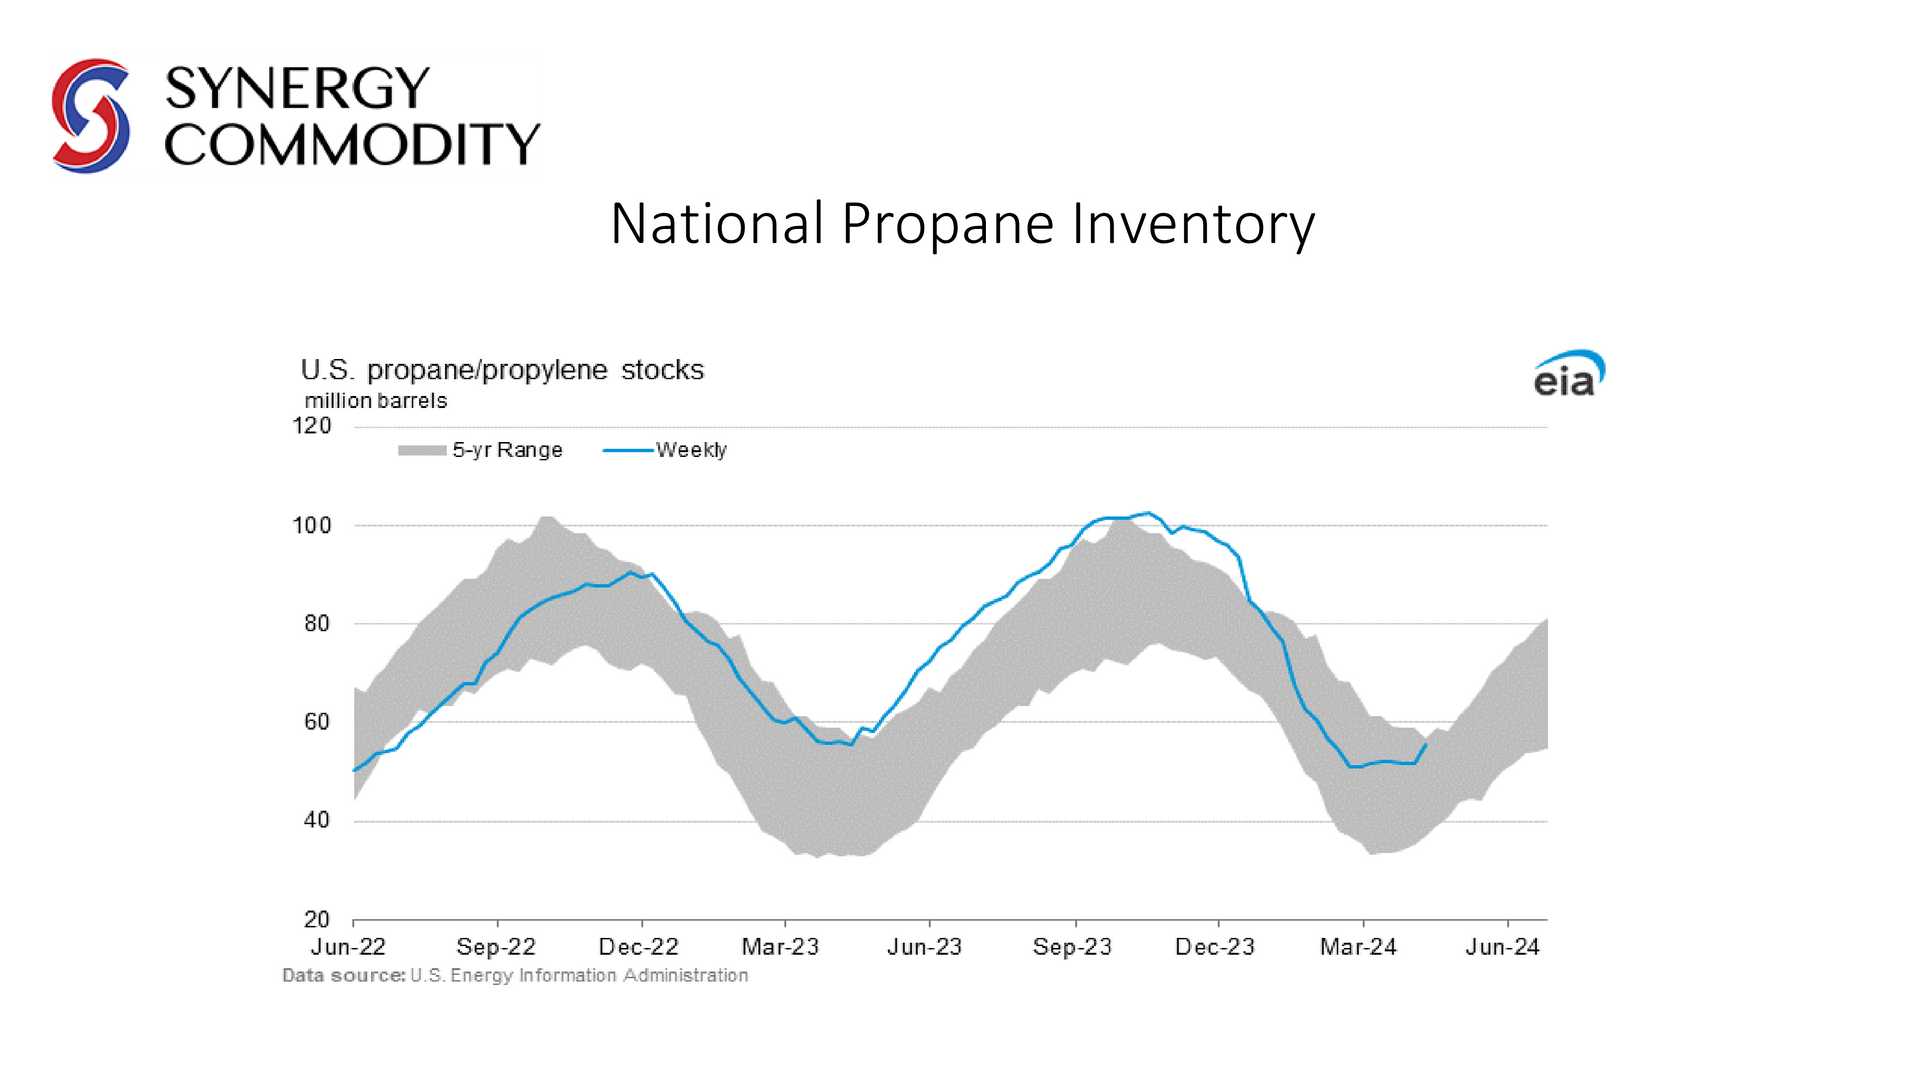 A graph showing the national propane inventory of Synergy Commodity